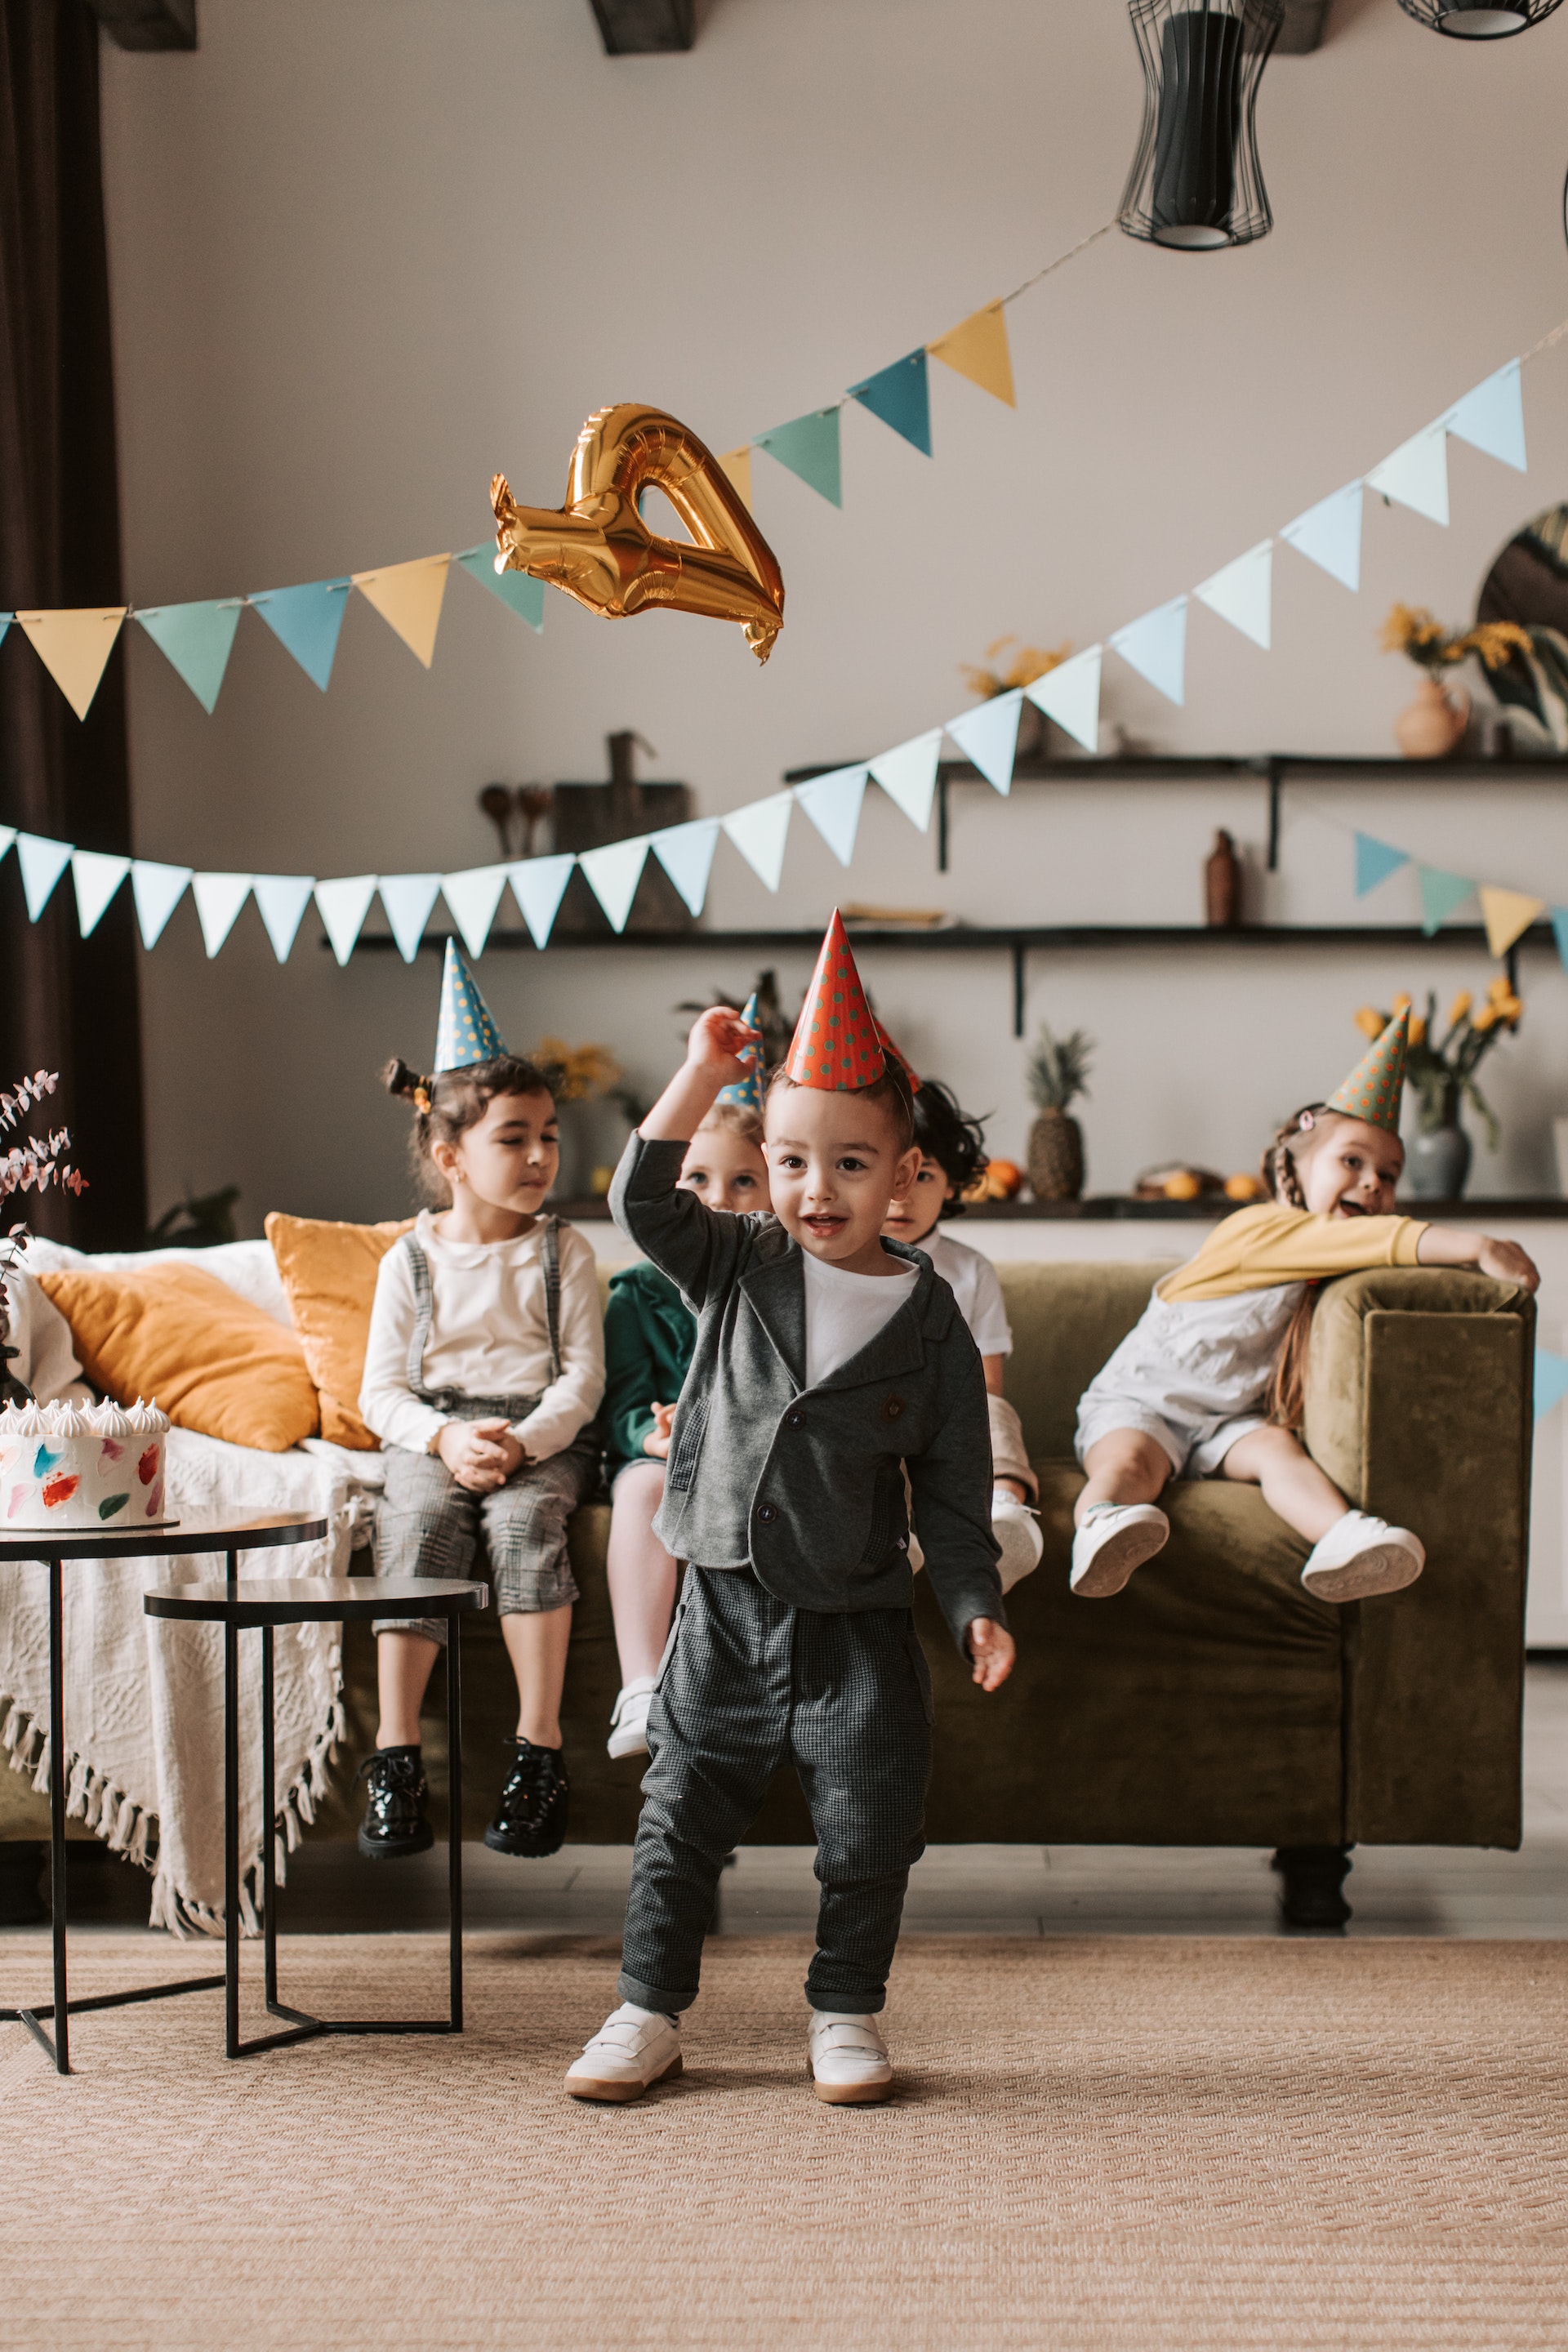 Kids at a birthday party | Source: Pexels